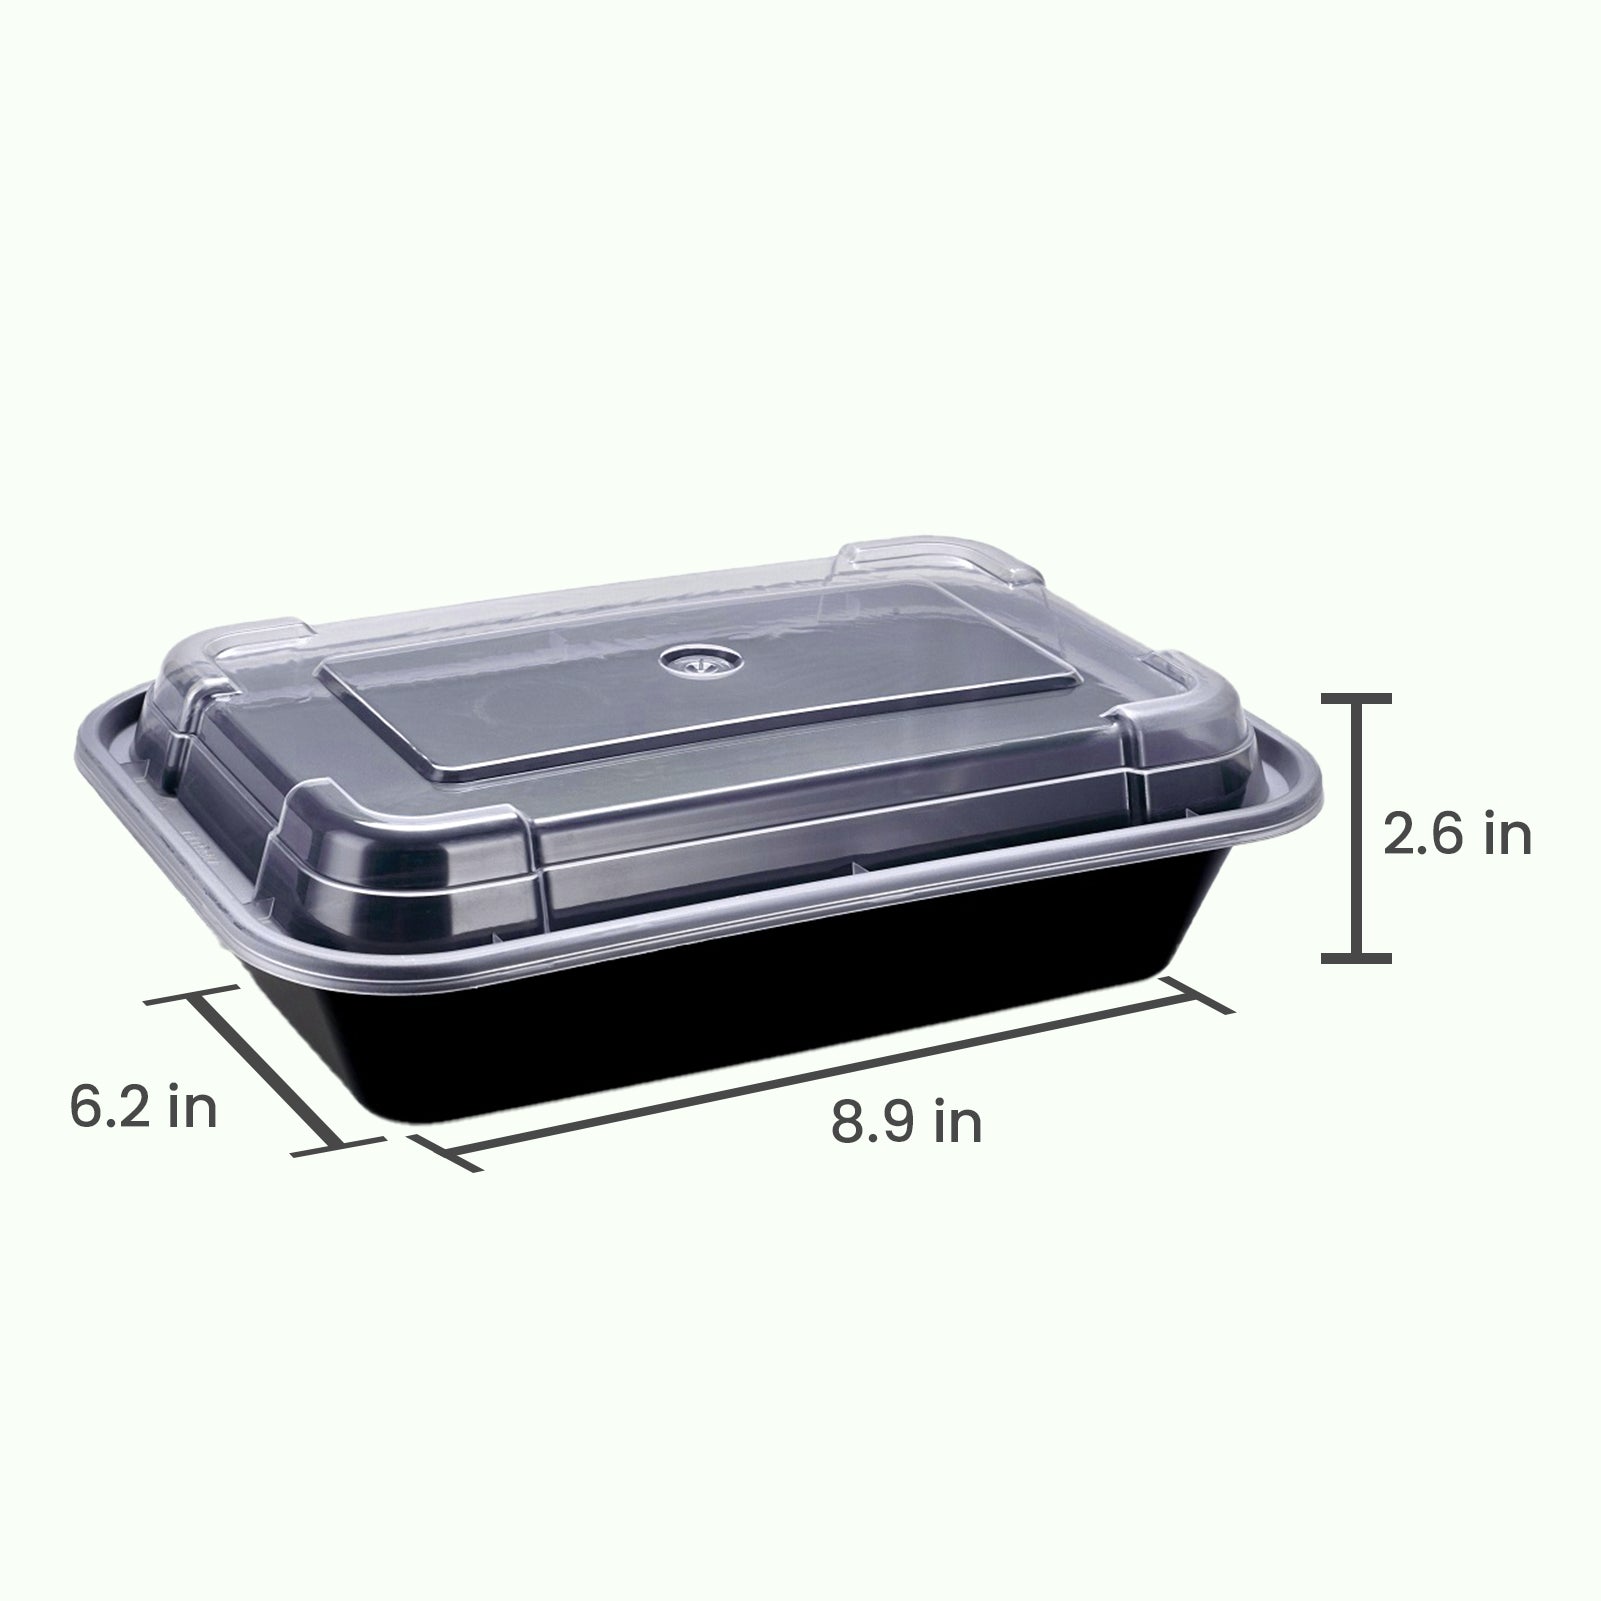 Enther [20 Pack] Single 1 Compartment Meal Prep Containers with Lids, Food Storage Bento Box with Portion Cups, BPA Free, Reusab